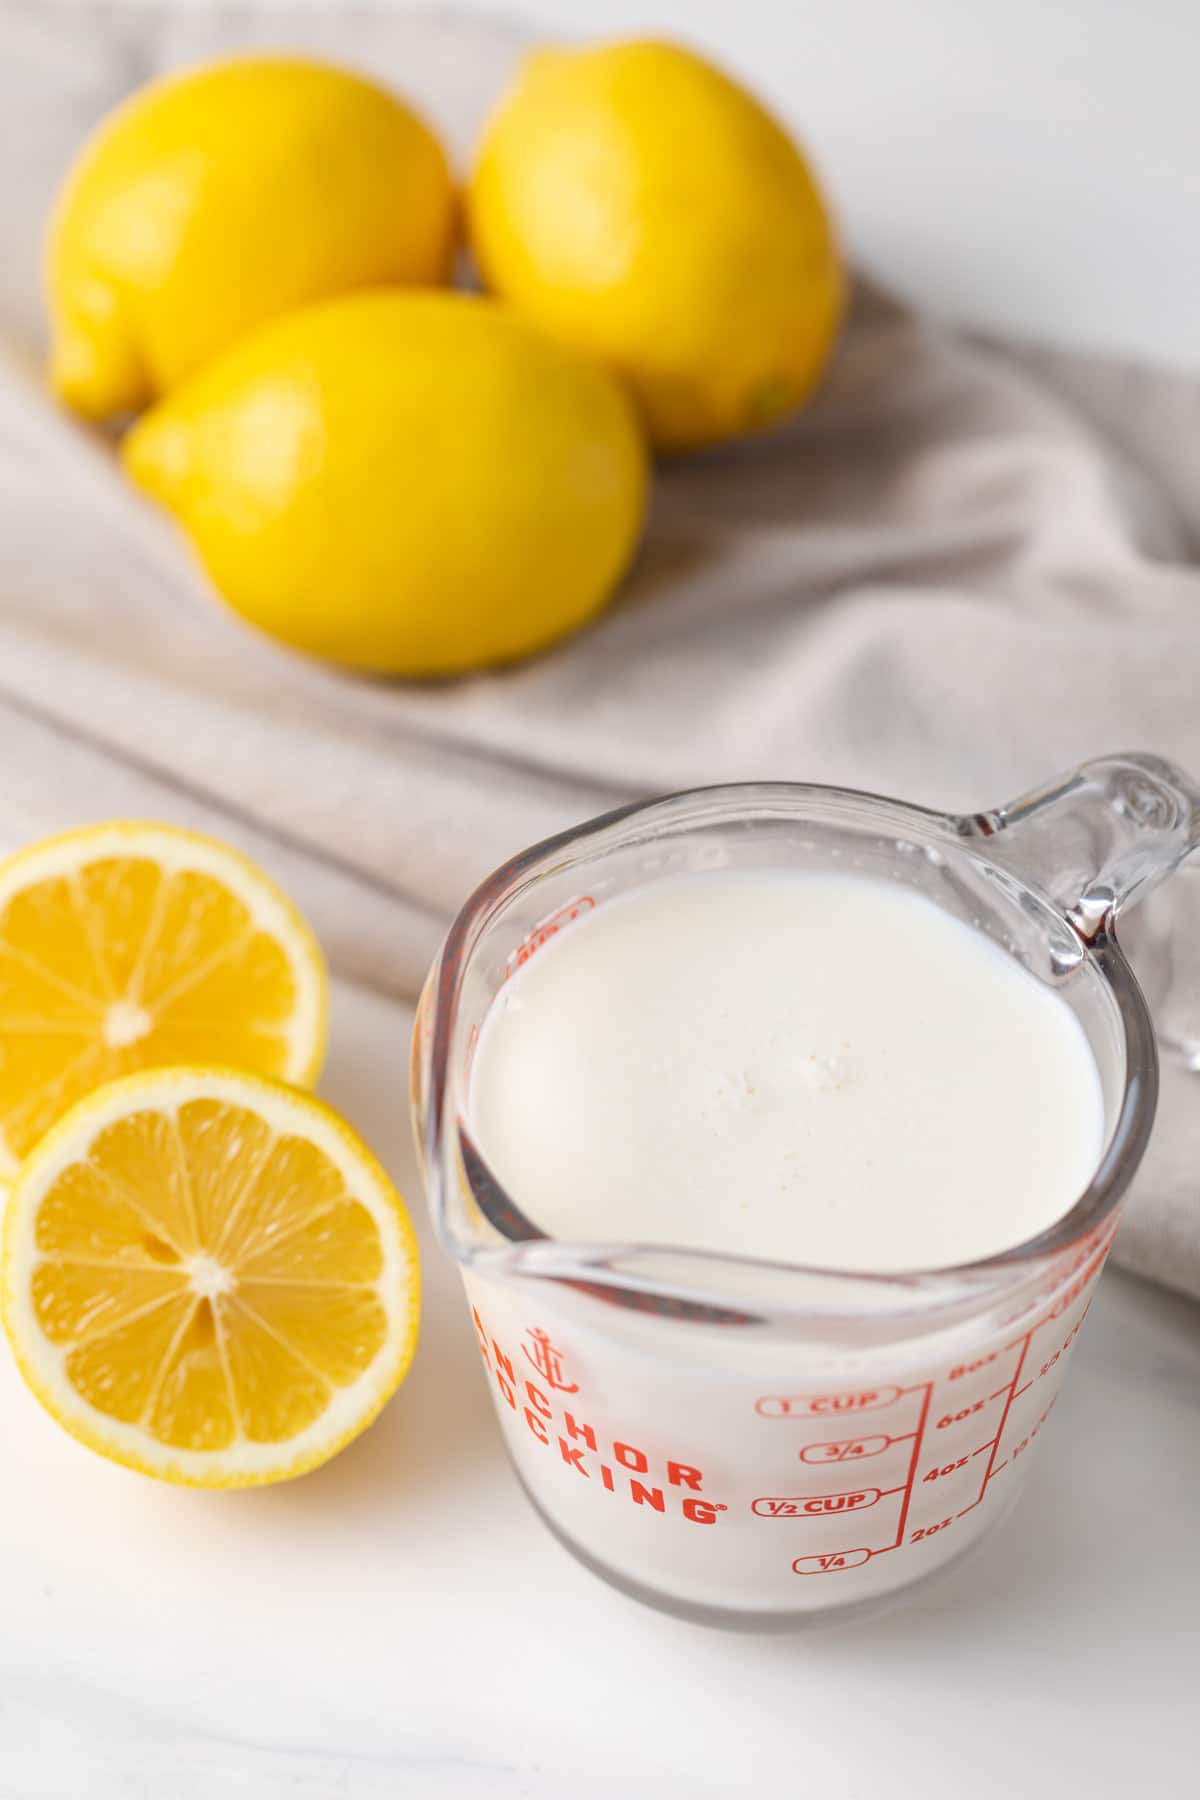 glass measuring cup filled with homemade buttermilk along with lemons and napkin in background